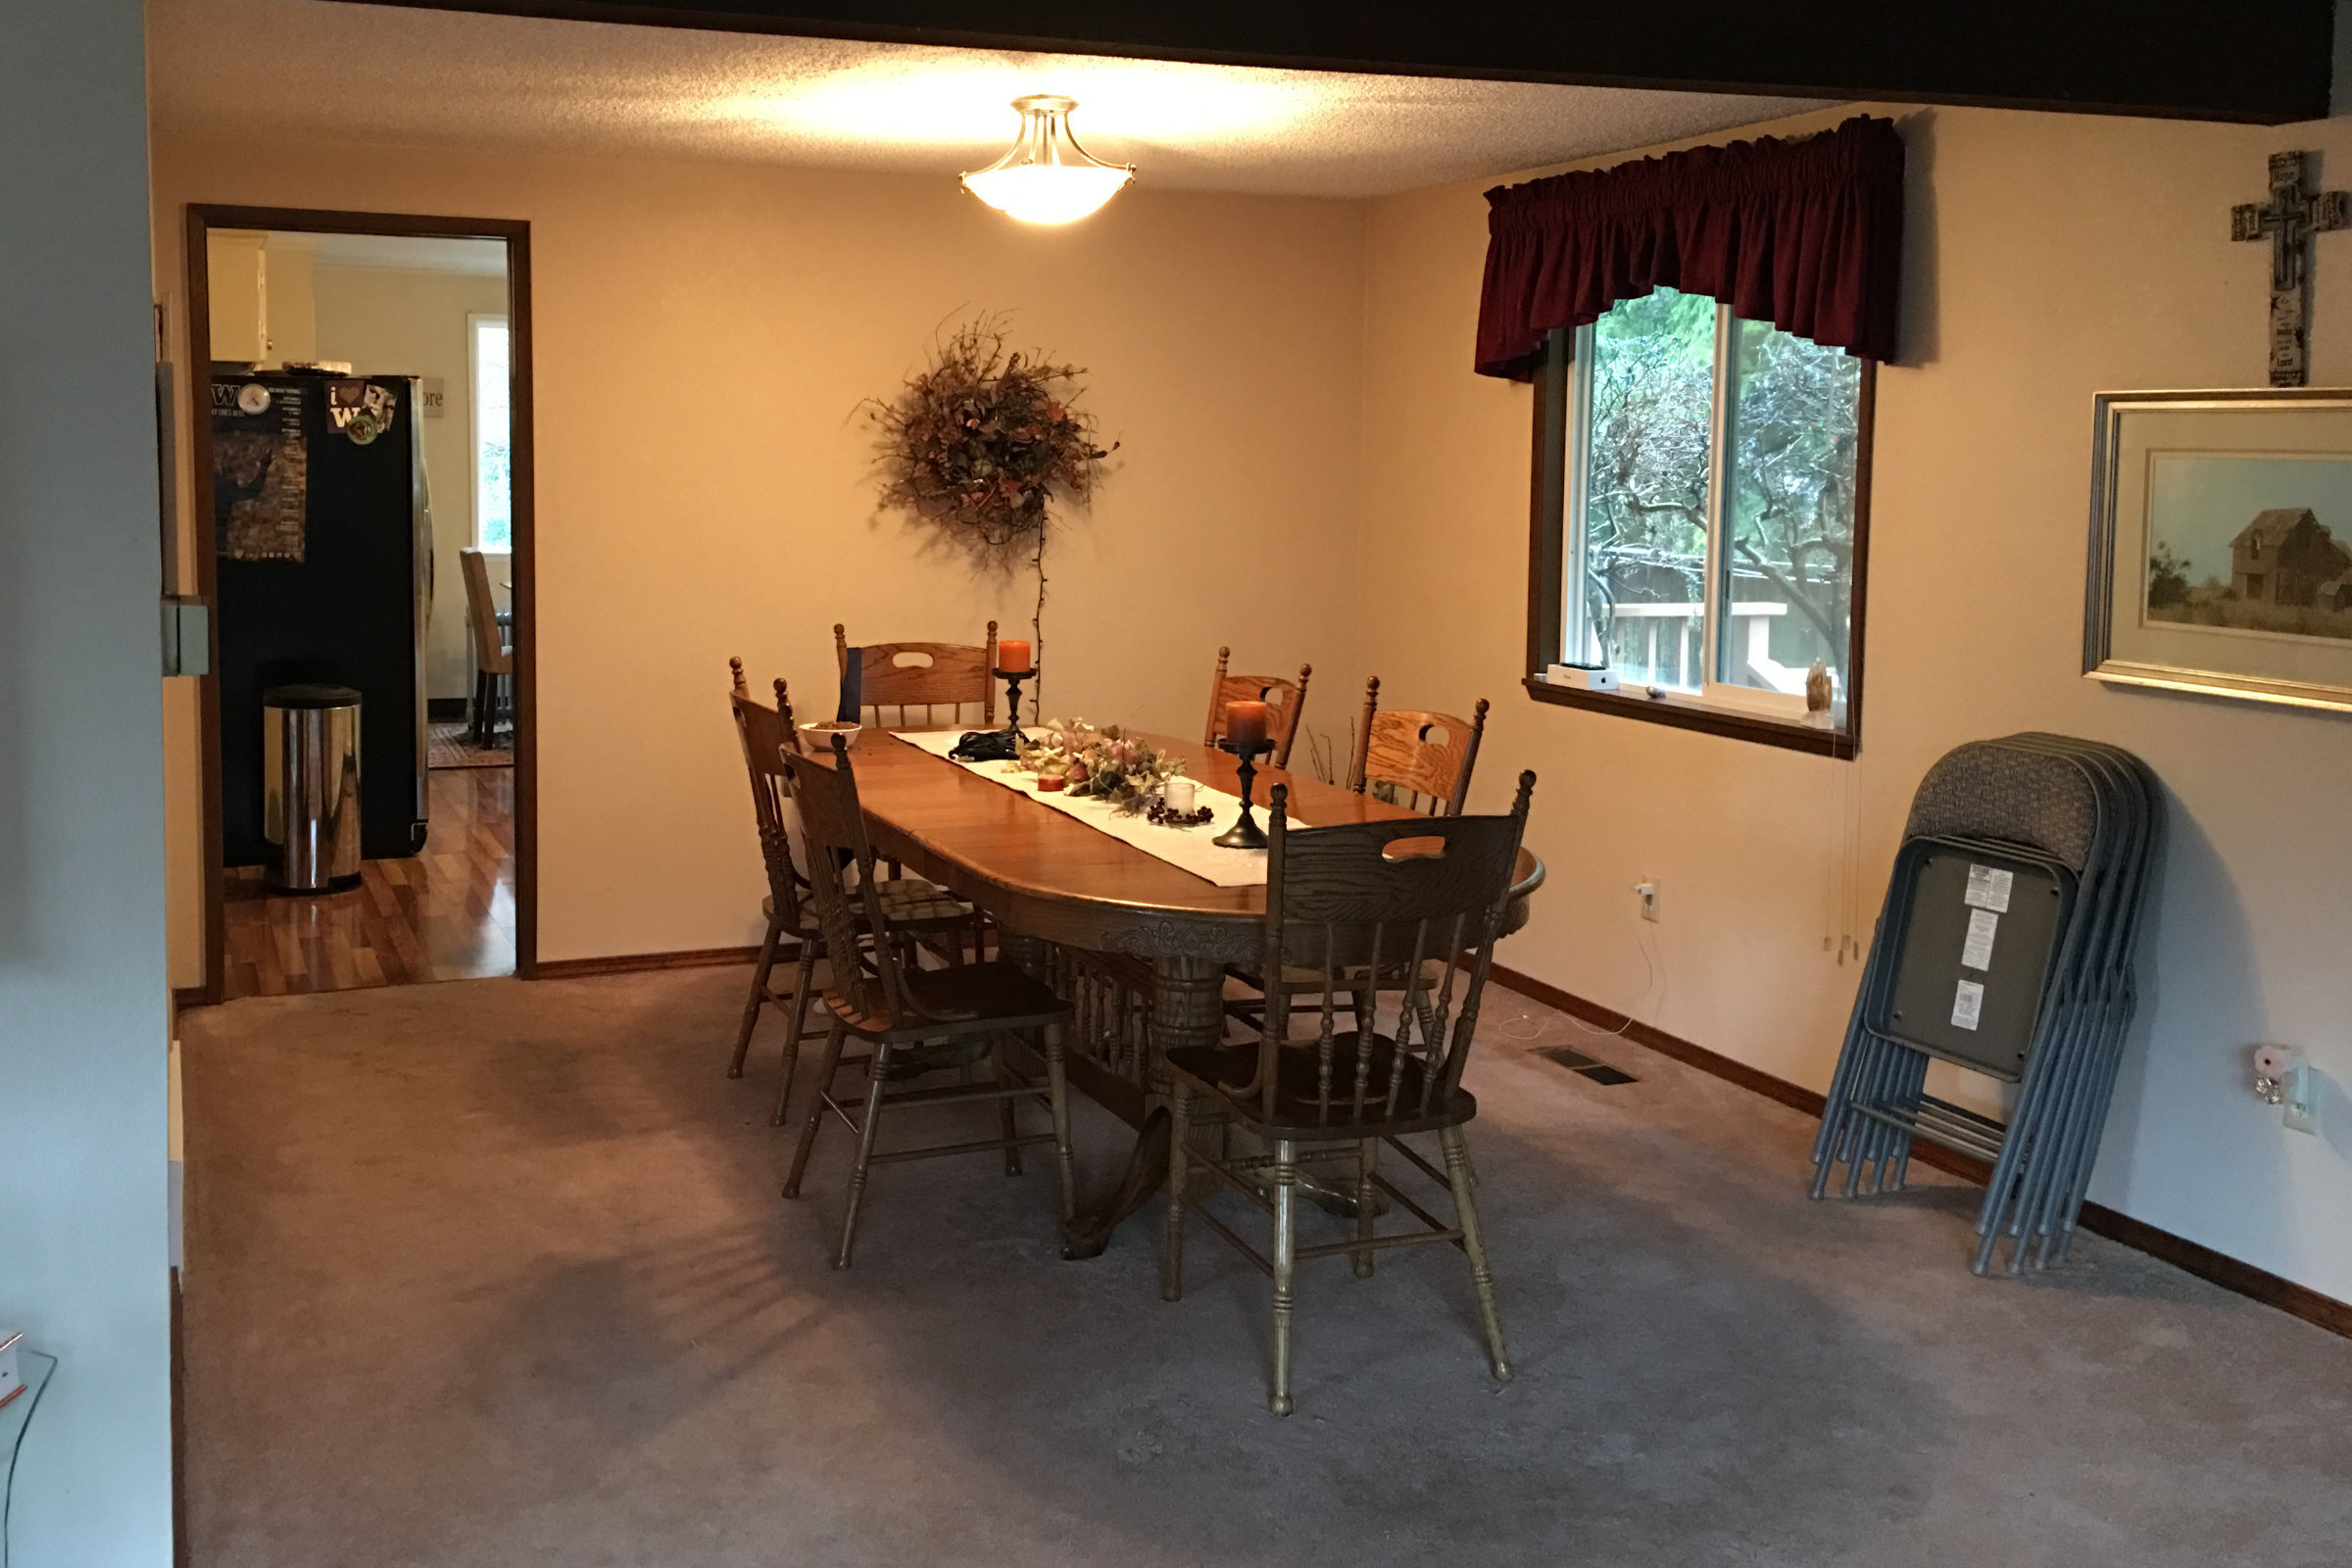 King dining room before cropped.jpg